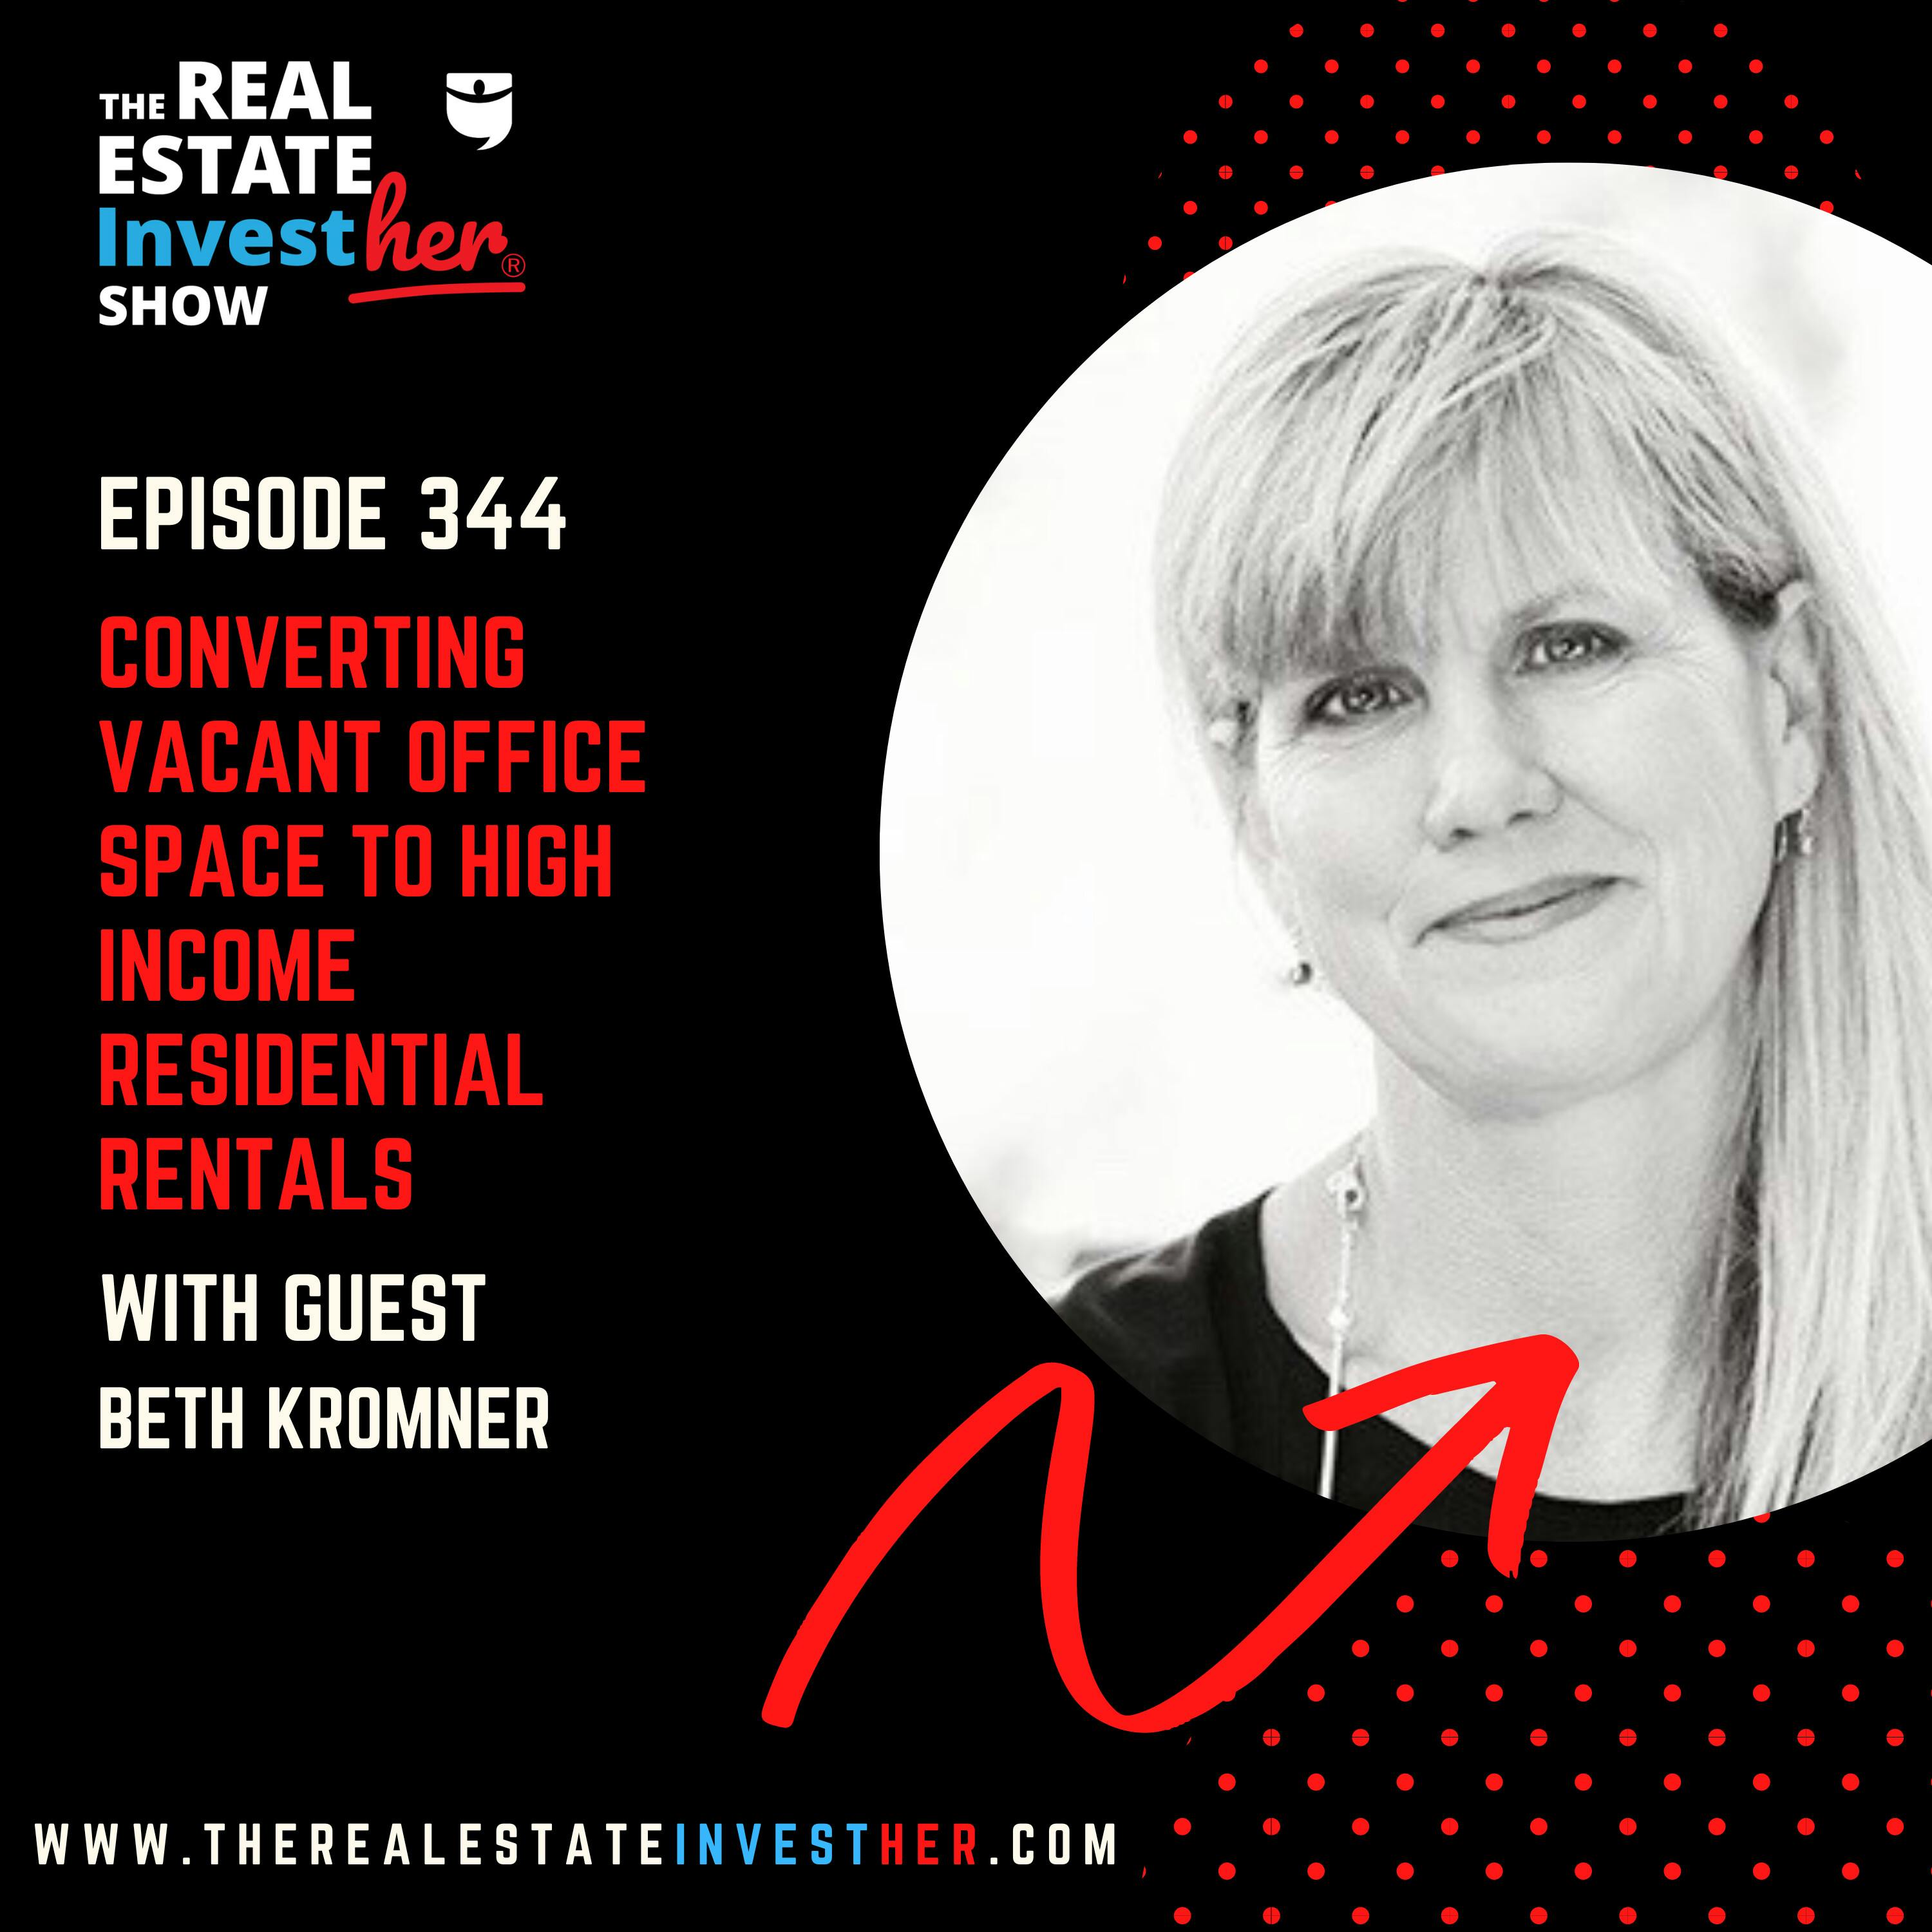 Converting Vacant Office Space to High Income Residential Rentals with Beth Kromner